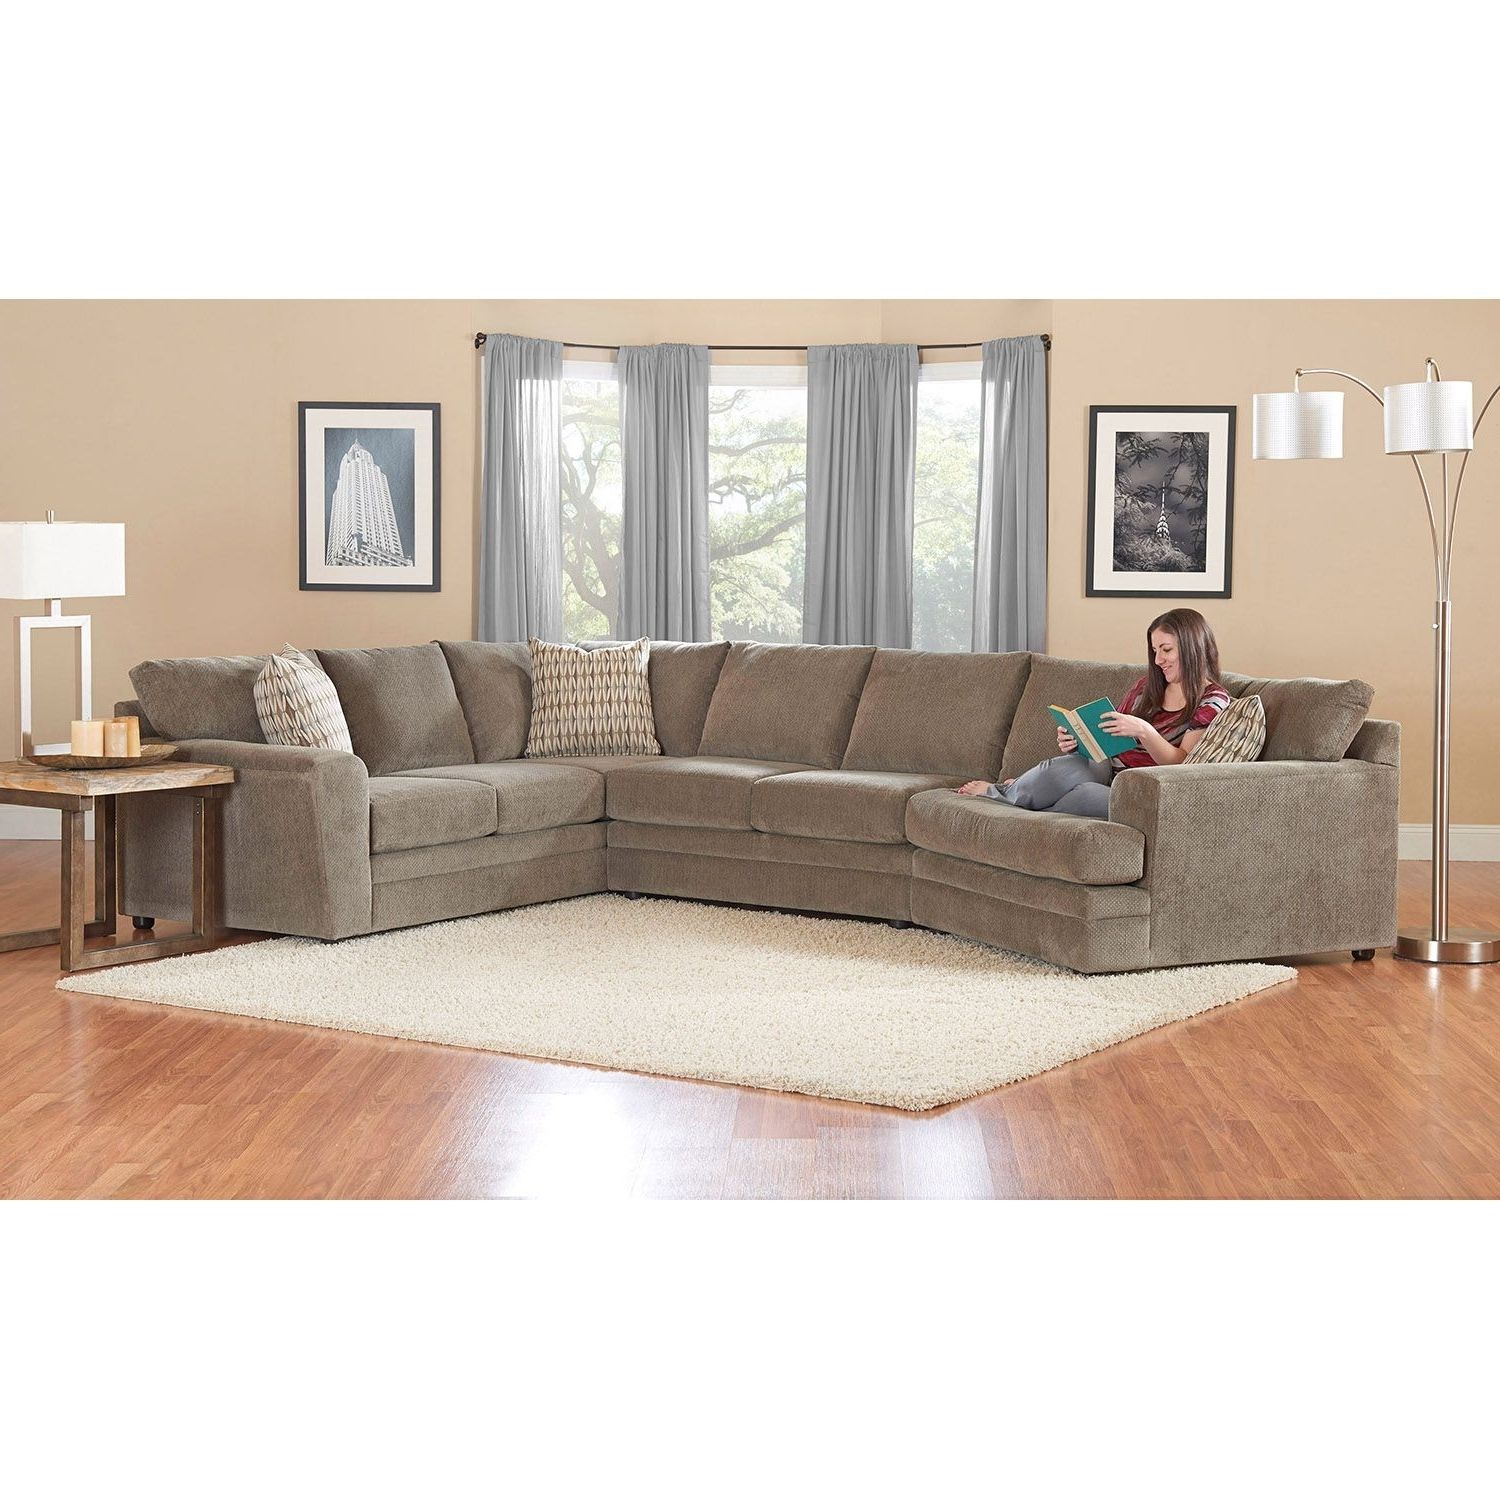 Featured Photo of Top 15 of Sams Club Sectional Sofas